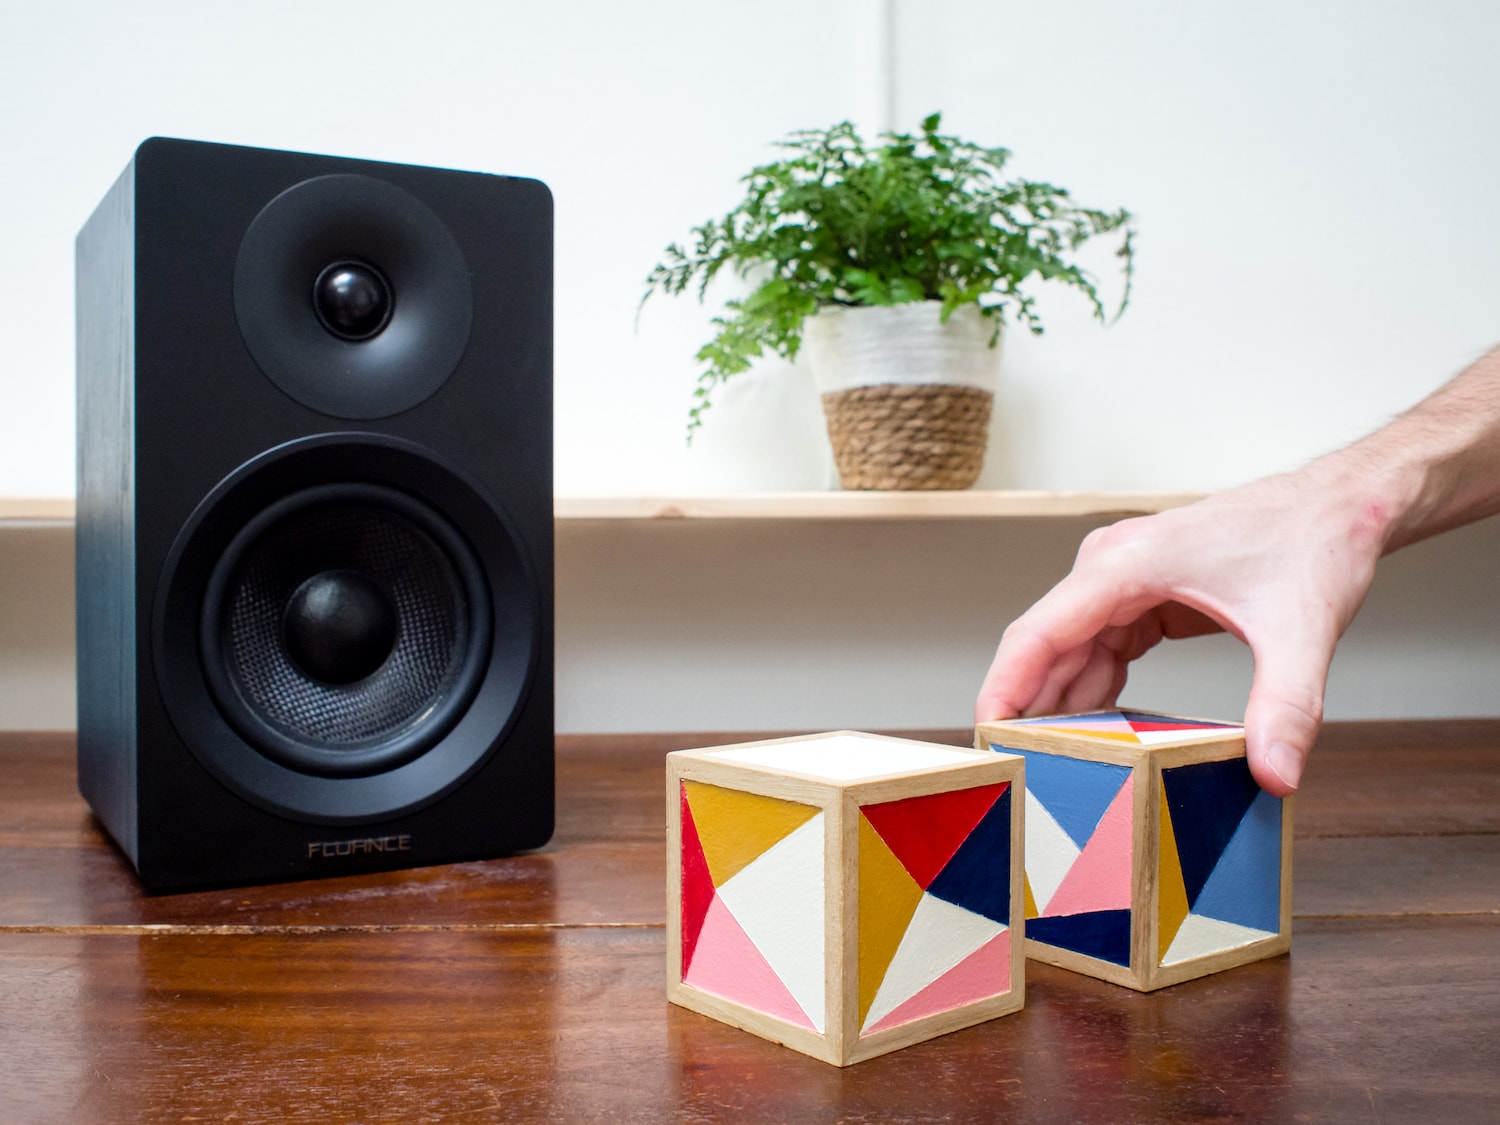 A photo of ml.cubes product prototype on a wooden desk next to a music speaker with a hand reaching out to grab one.